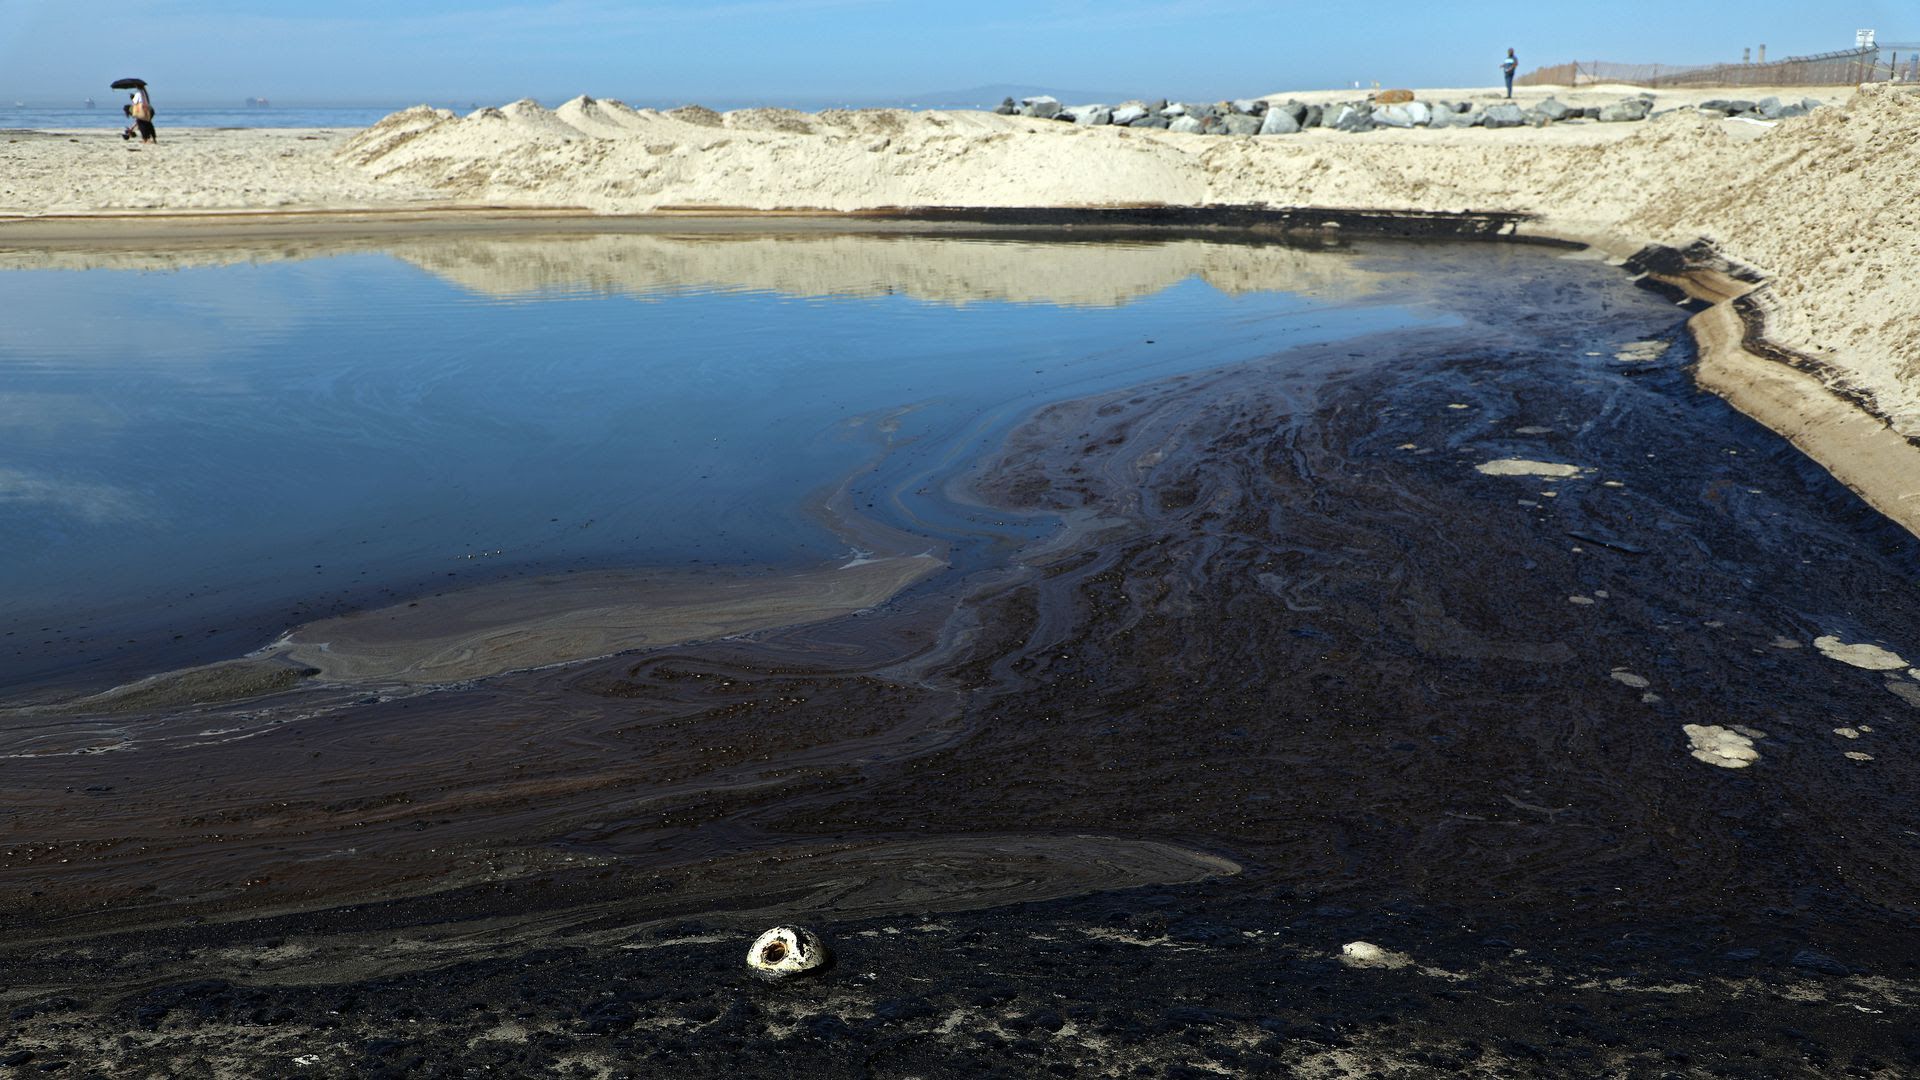 Oil and sea water collect in a tide pool in Newport Beach, Calif. on Oct. 3, 2021. Photo: Michael Heiman/Getty Images